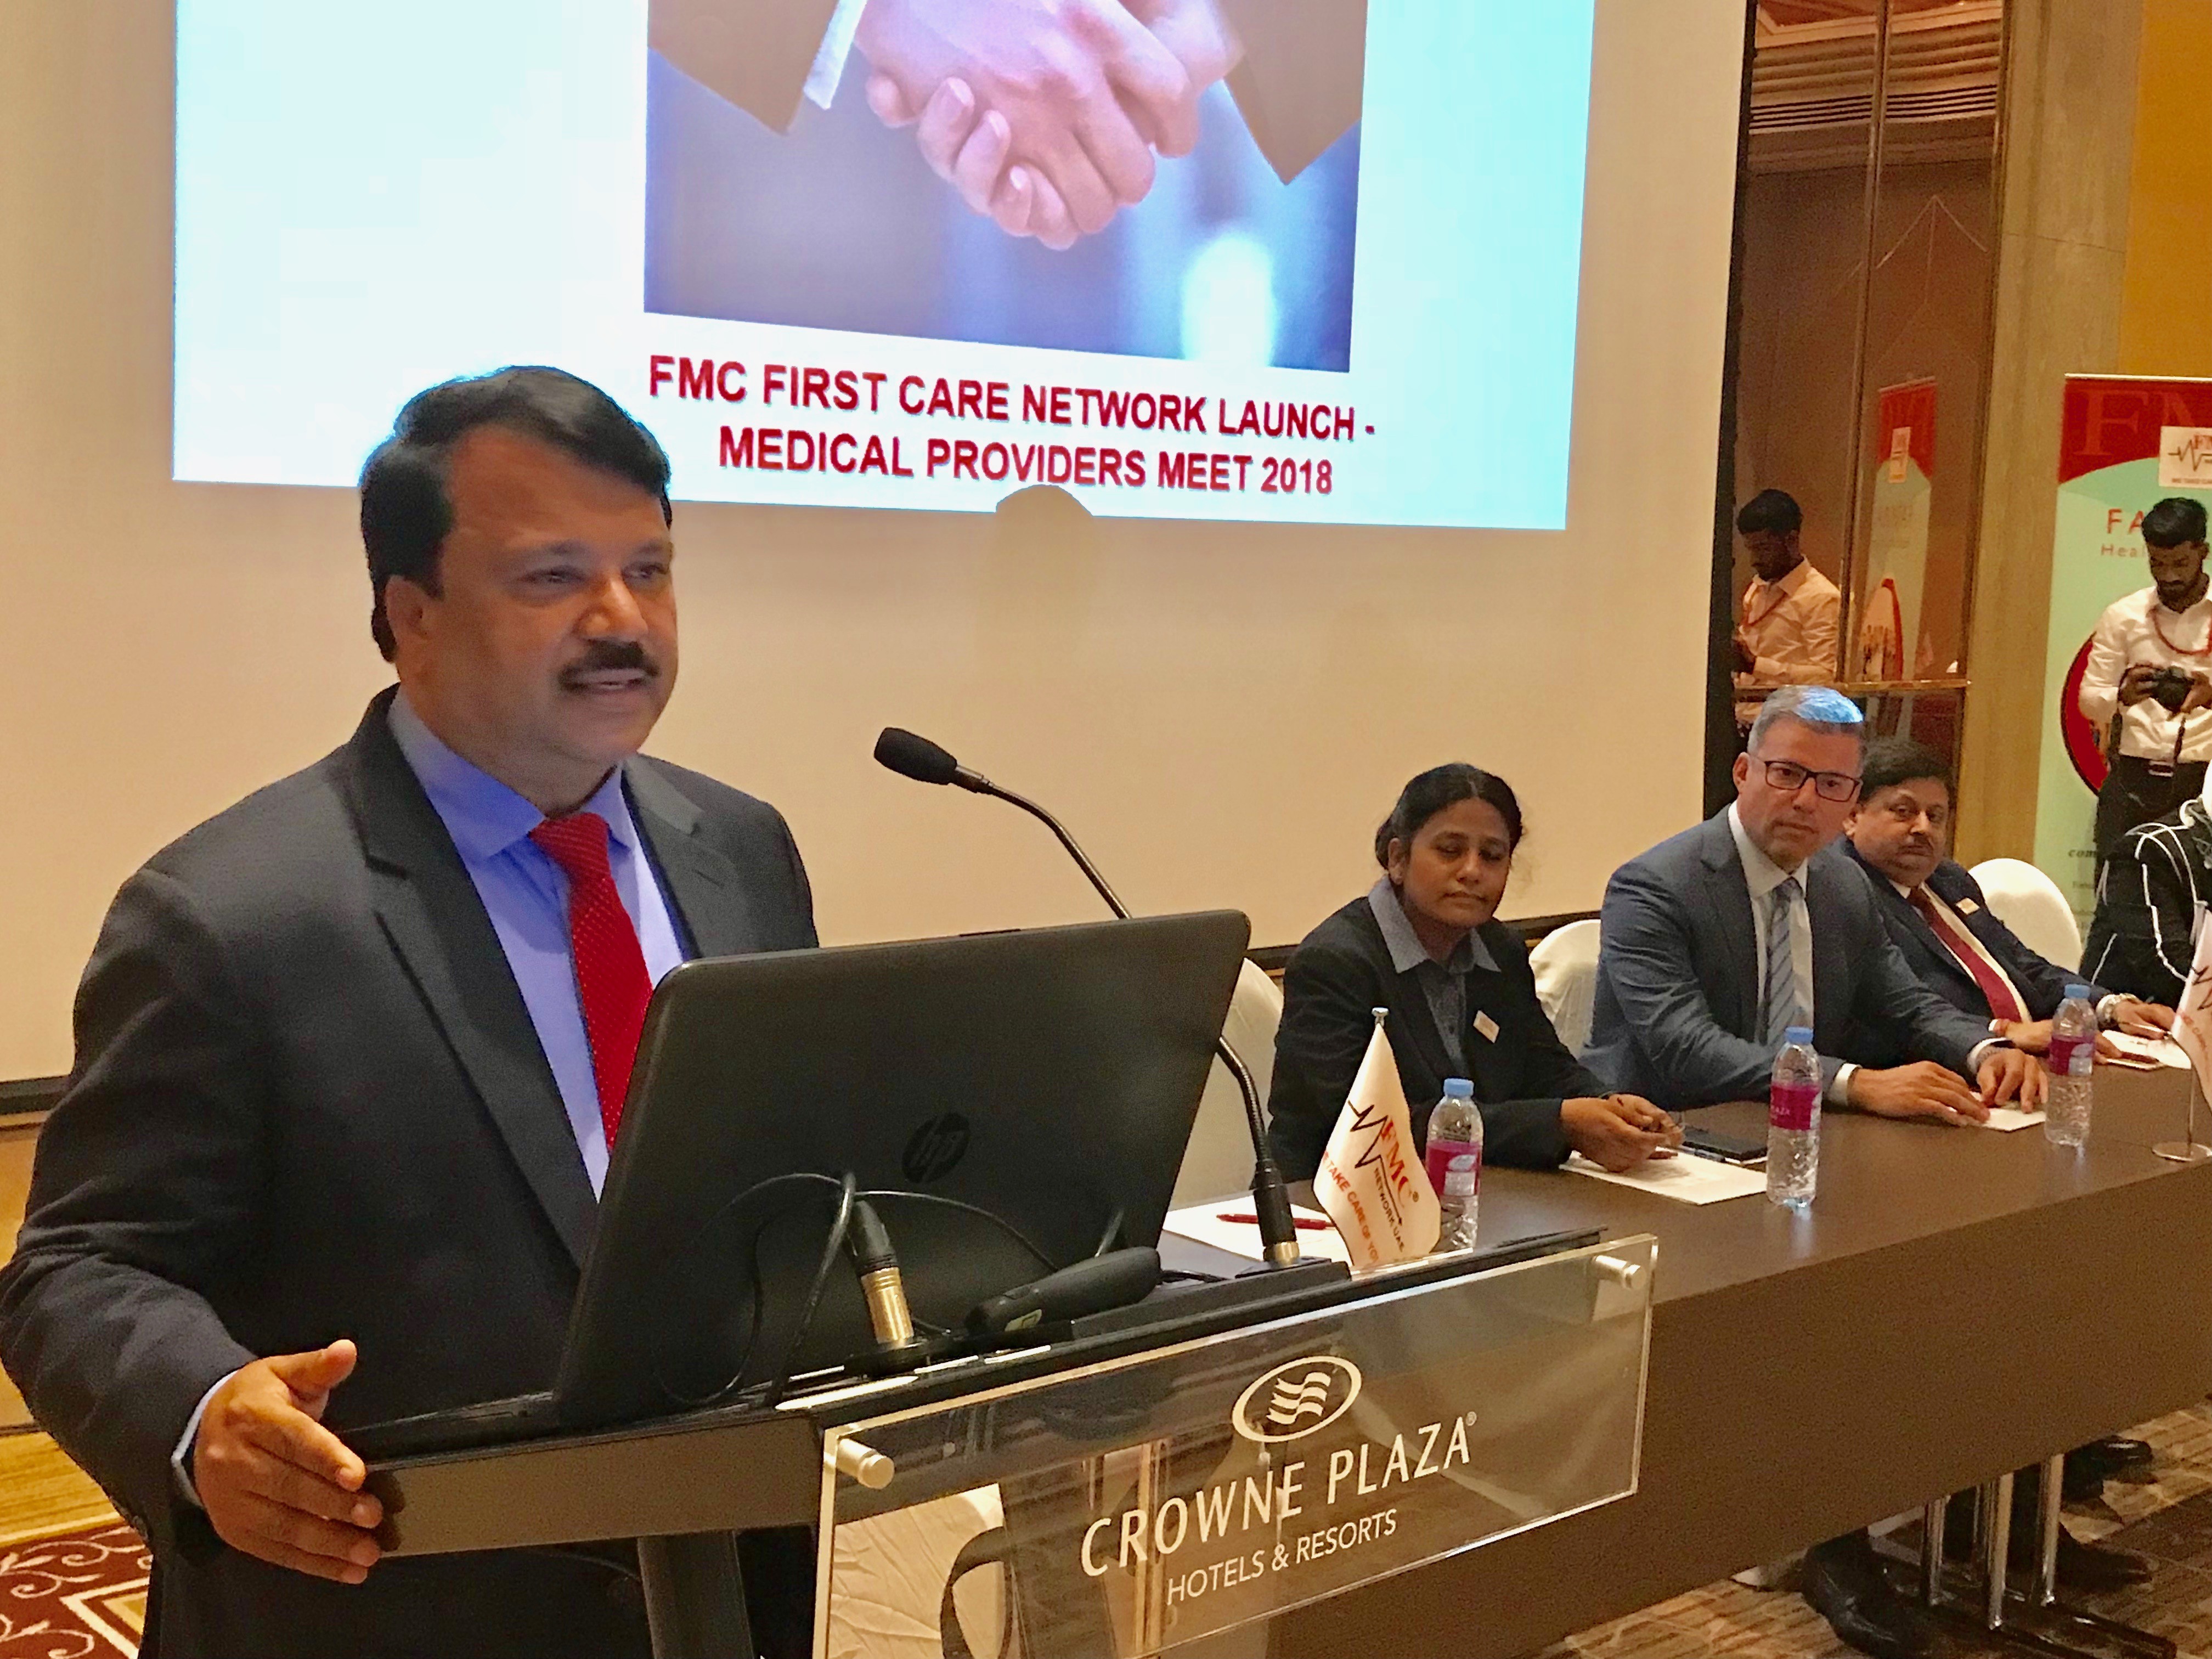 FMC Network UAE Conducted Its Medical Providers Meet On 14th Of February 2018, At Crown Plaza Hotel, Dubai.